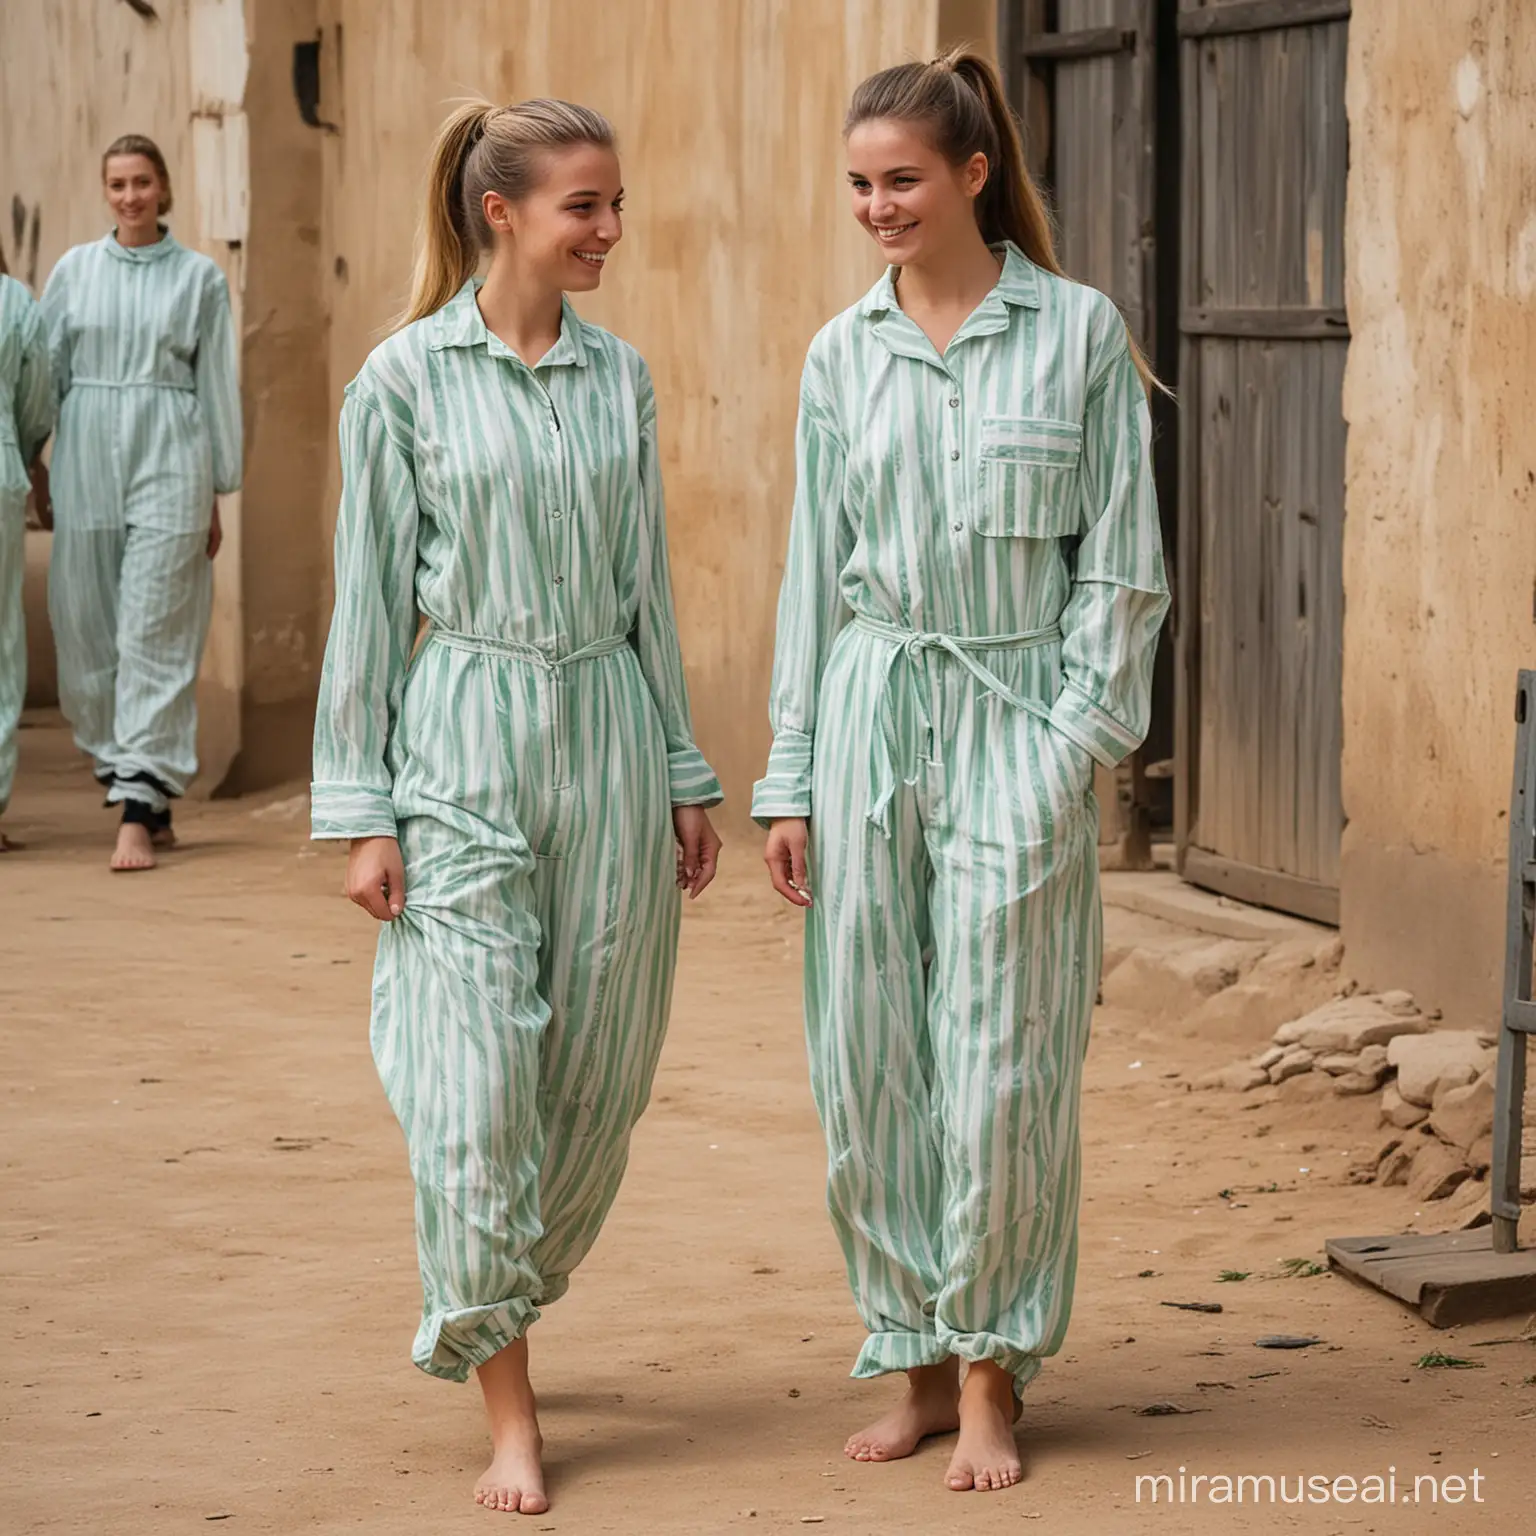 Two Young Female Prisoners Chatting at Dinner in Prison Camp